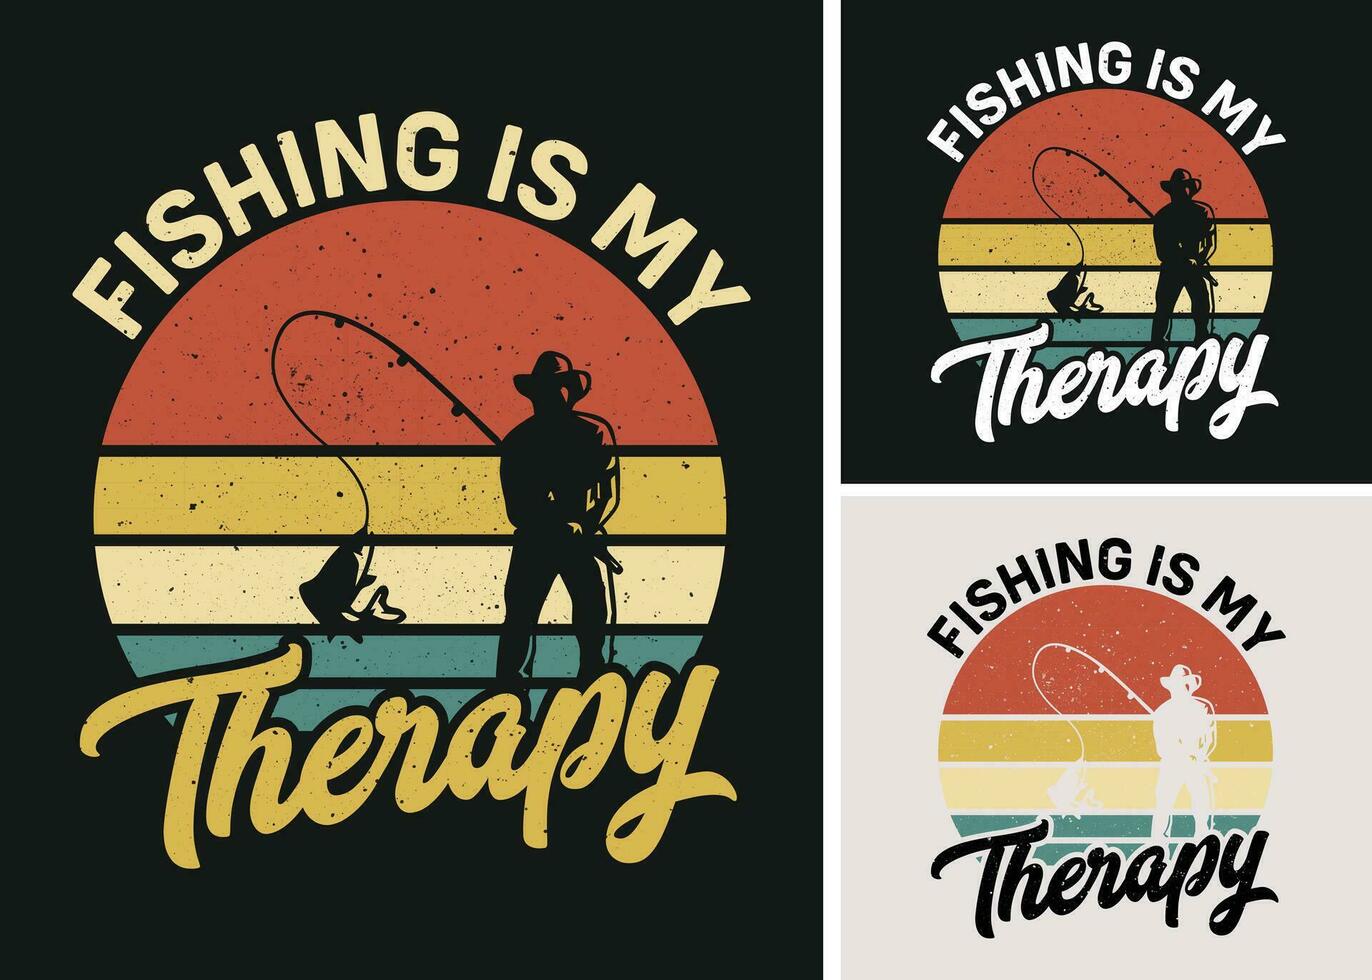 Fishing is my Therapy Retro Vintage Sunset T-shirt Design, Fishing Lover, Hooker, Fishing shirts, vector